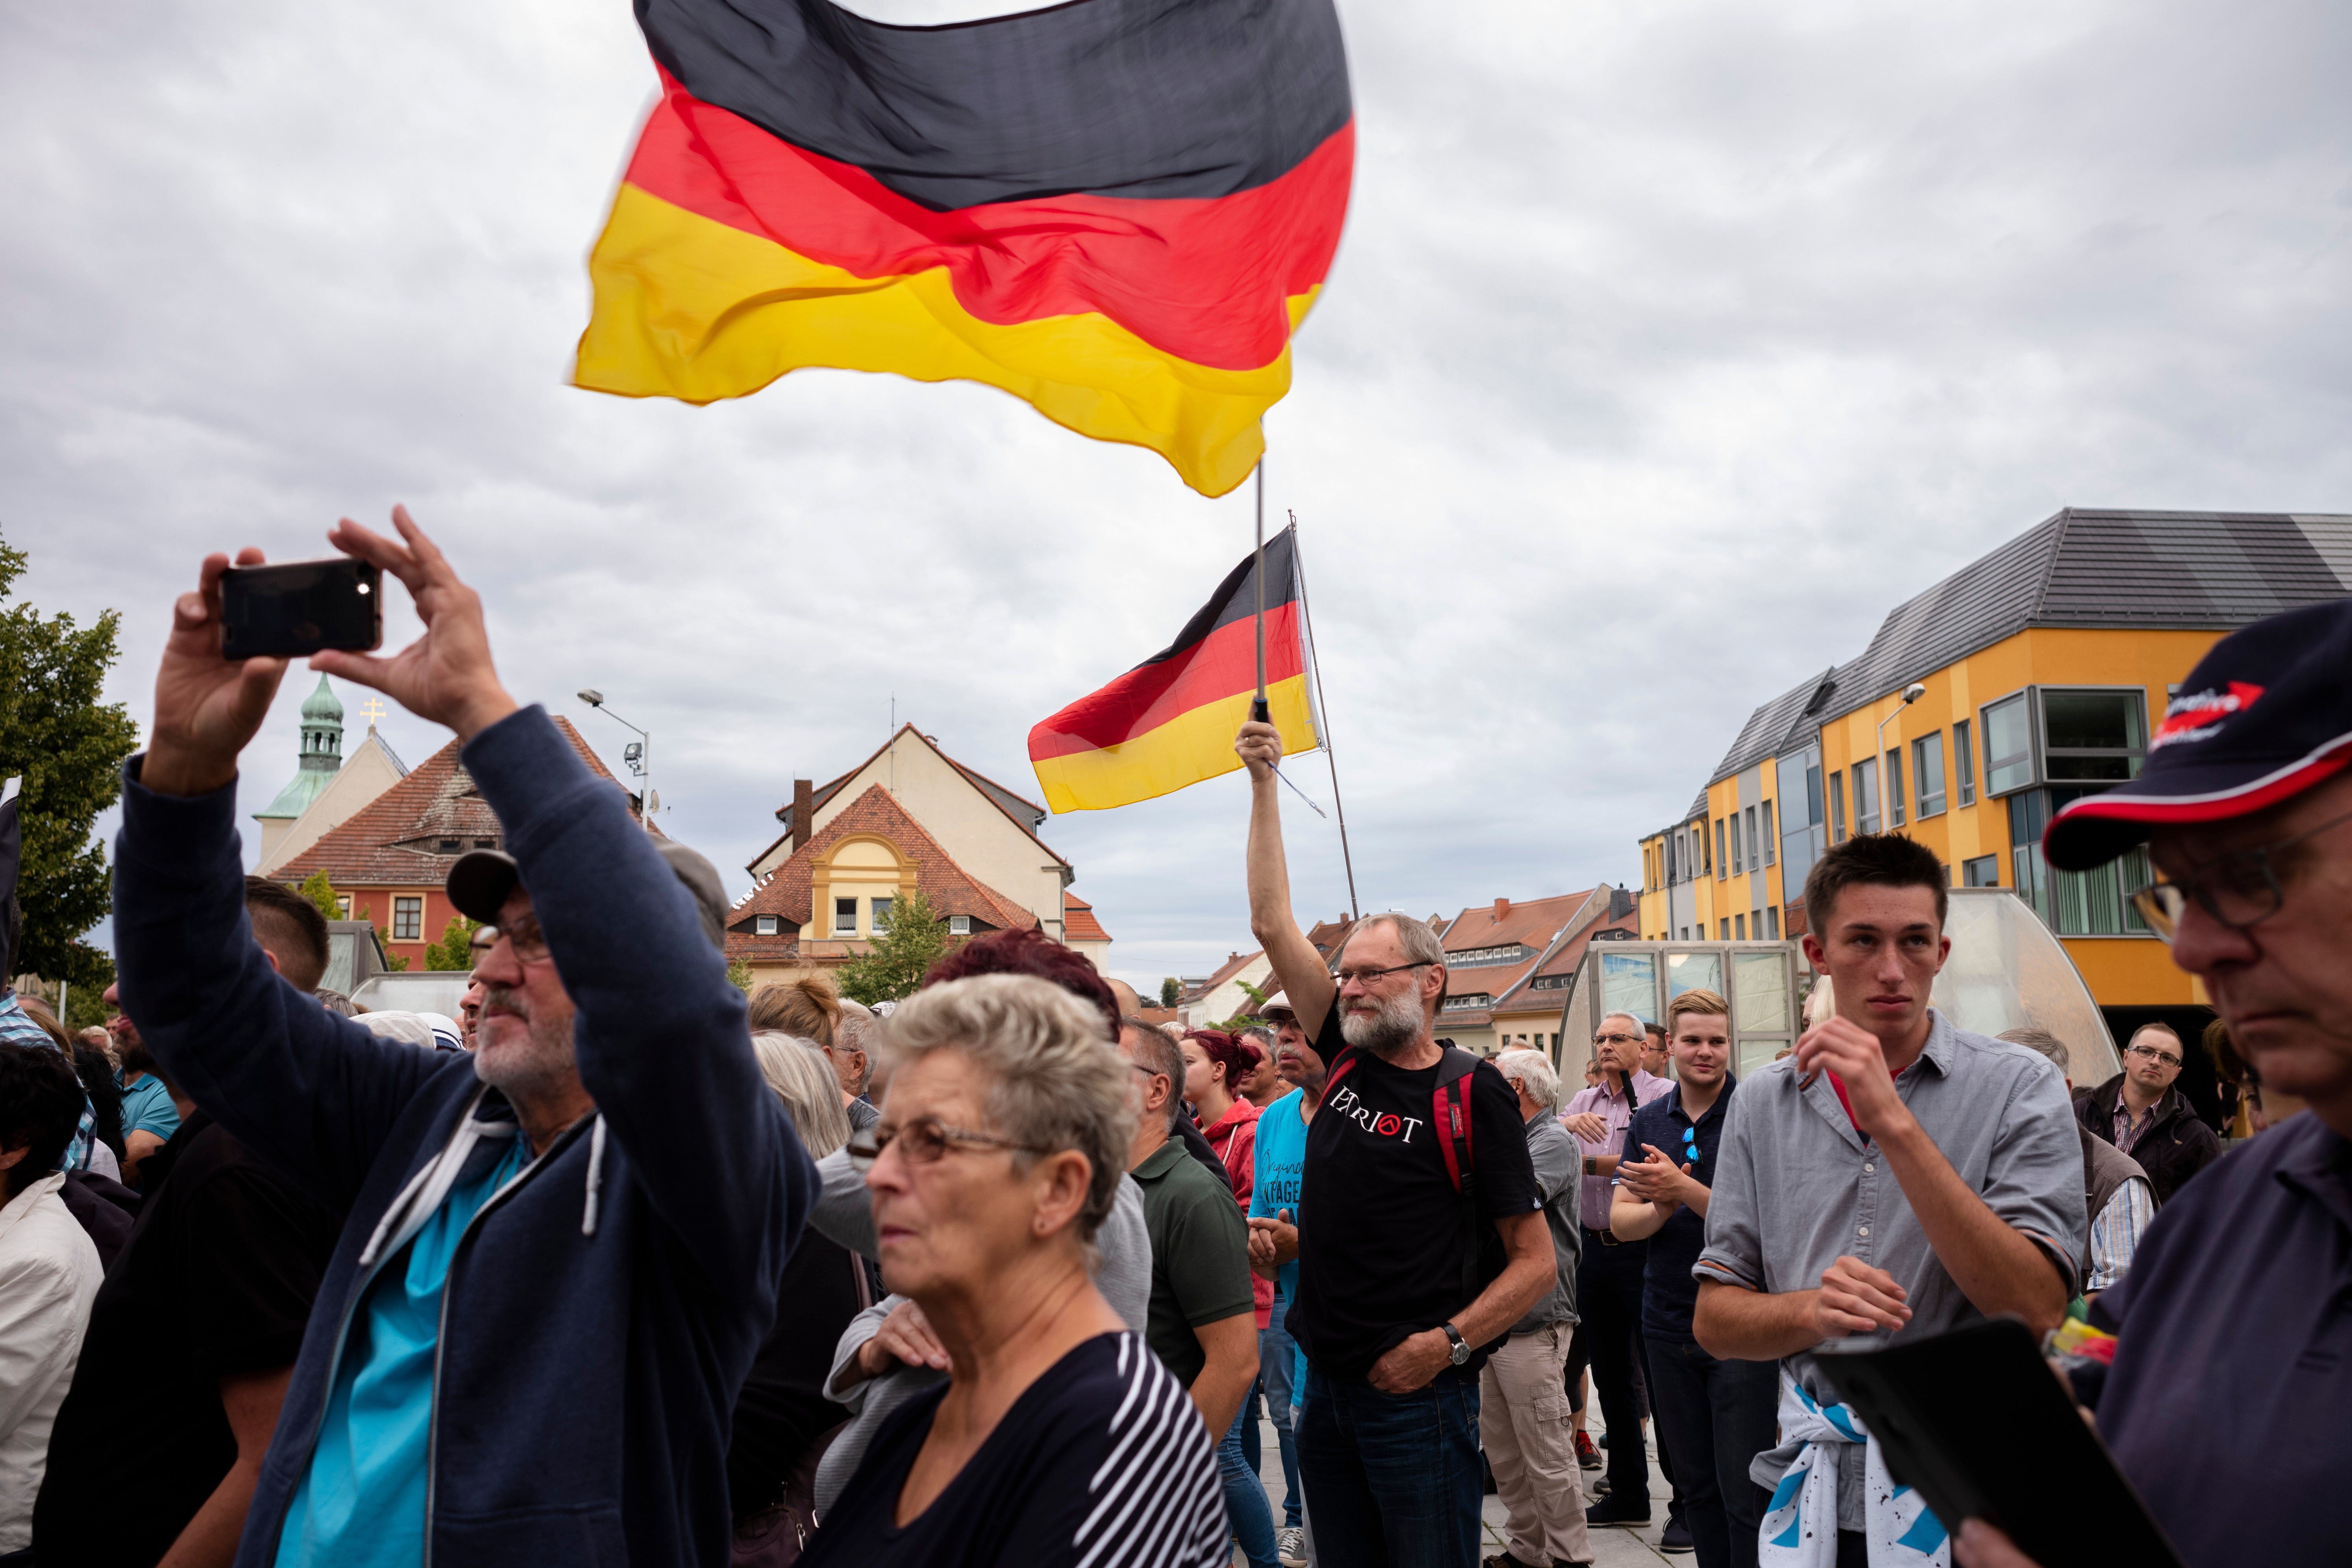 People attend an election rally of the far-right Alternative for Germany, or AfD, party for the Saxony state elections in Bautzen, Germany